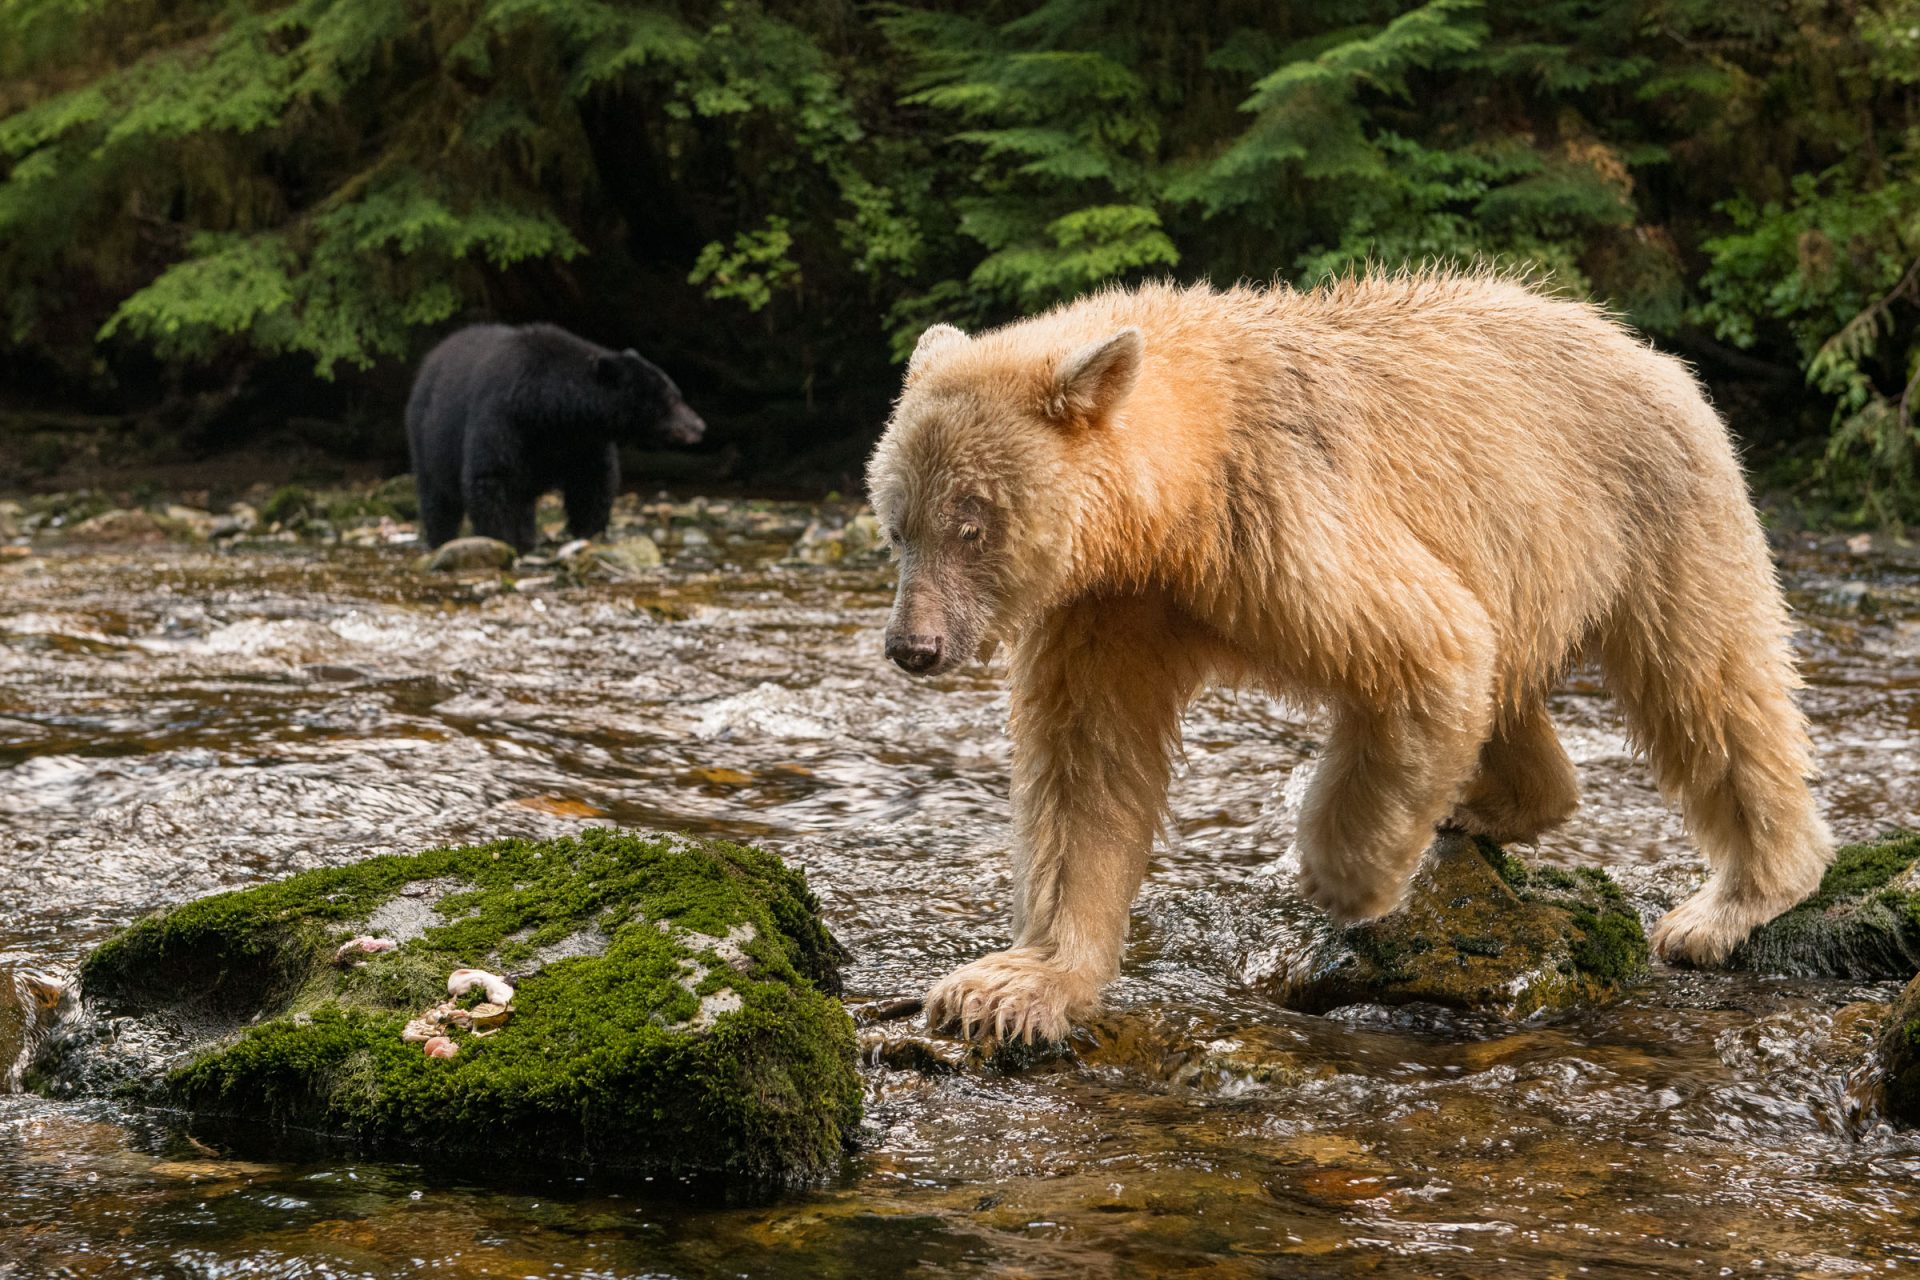 A female spirit bear, or kermode bear (Ursus americanus kermodei), known as "Ma'ah," crosses rocks in a river looking for passing salmon, while a black bear (Ursus americanus) fishes in the background. According to previously published data, black-coated bears are only successful at catching a fish 1/4 of the time, while white-coated bears do so at a rate of 1/3 of the time, given them an advantage that reseachers say is related to their white fur. Great Bear Rainforest, British Columbia, Canada.